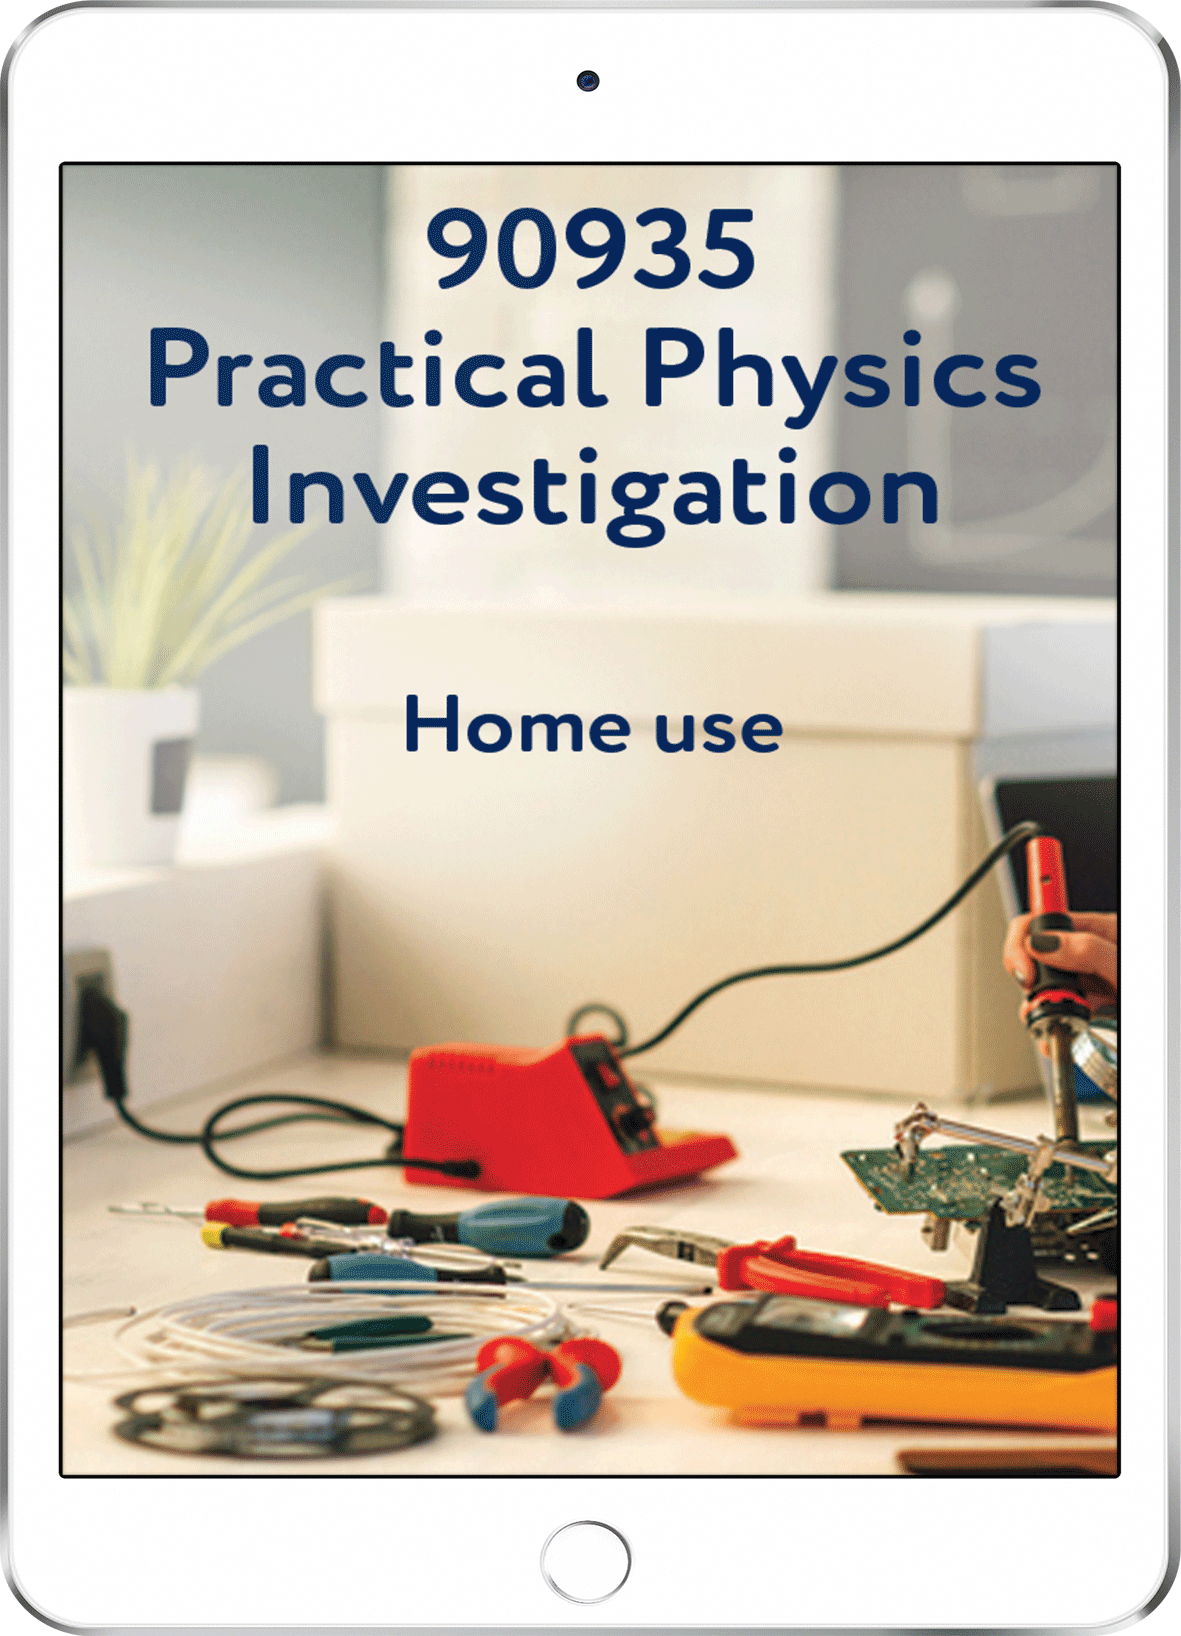 90935 Practical Physics Investigation - Home Use